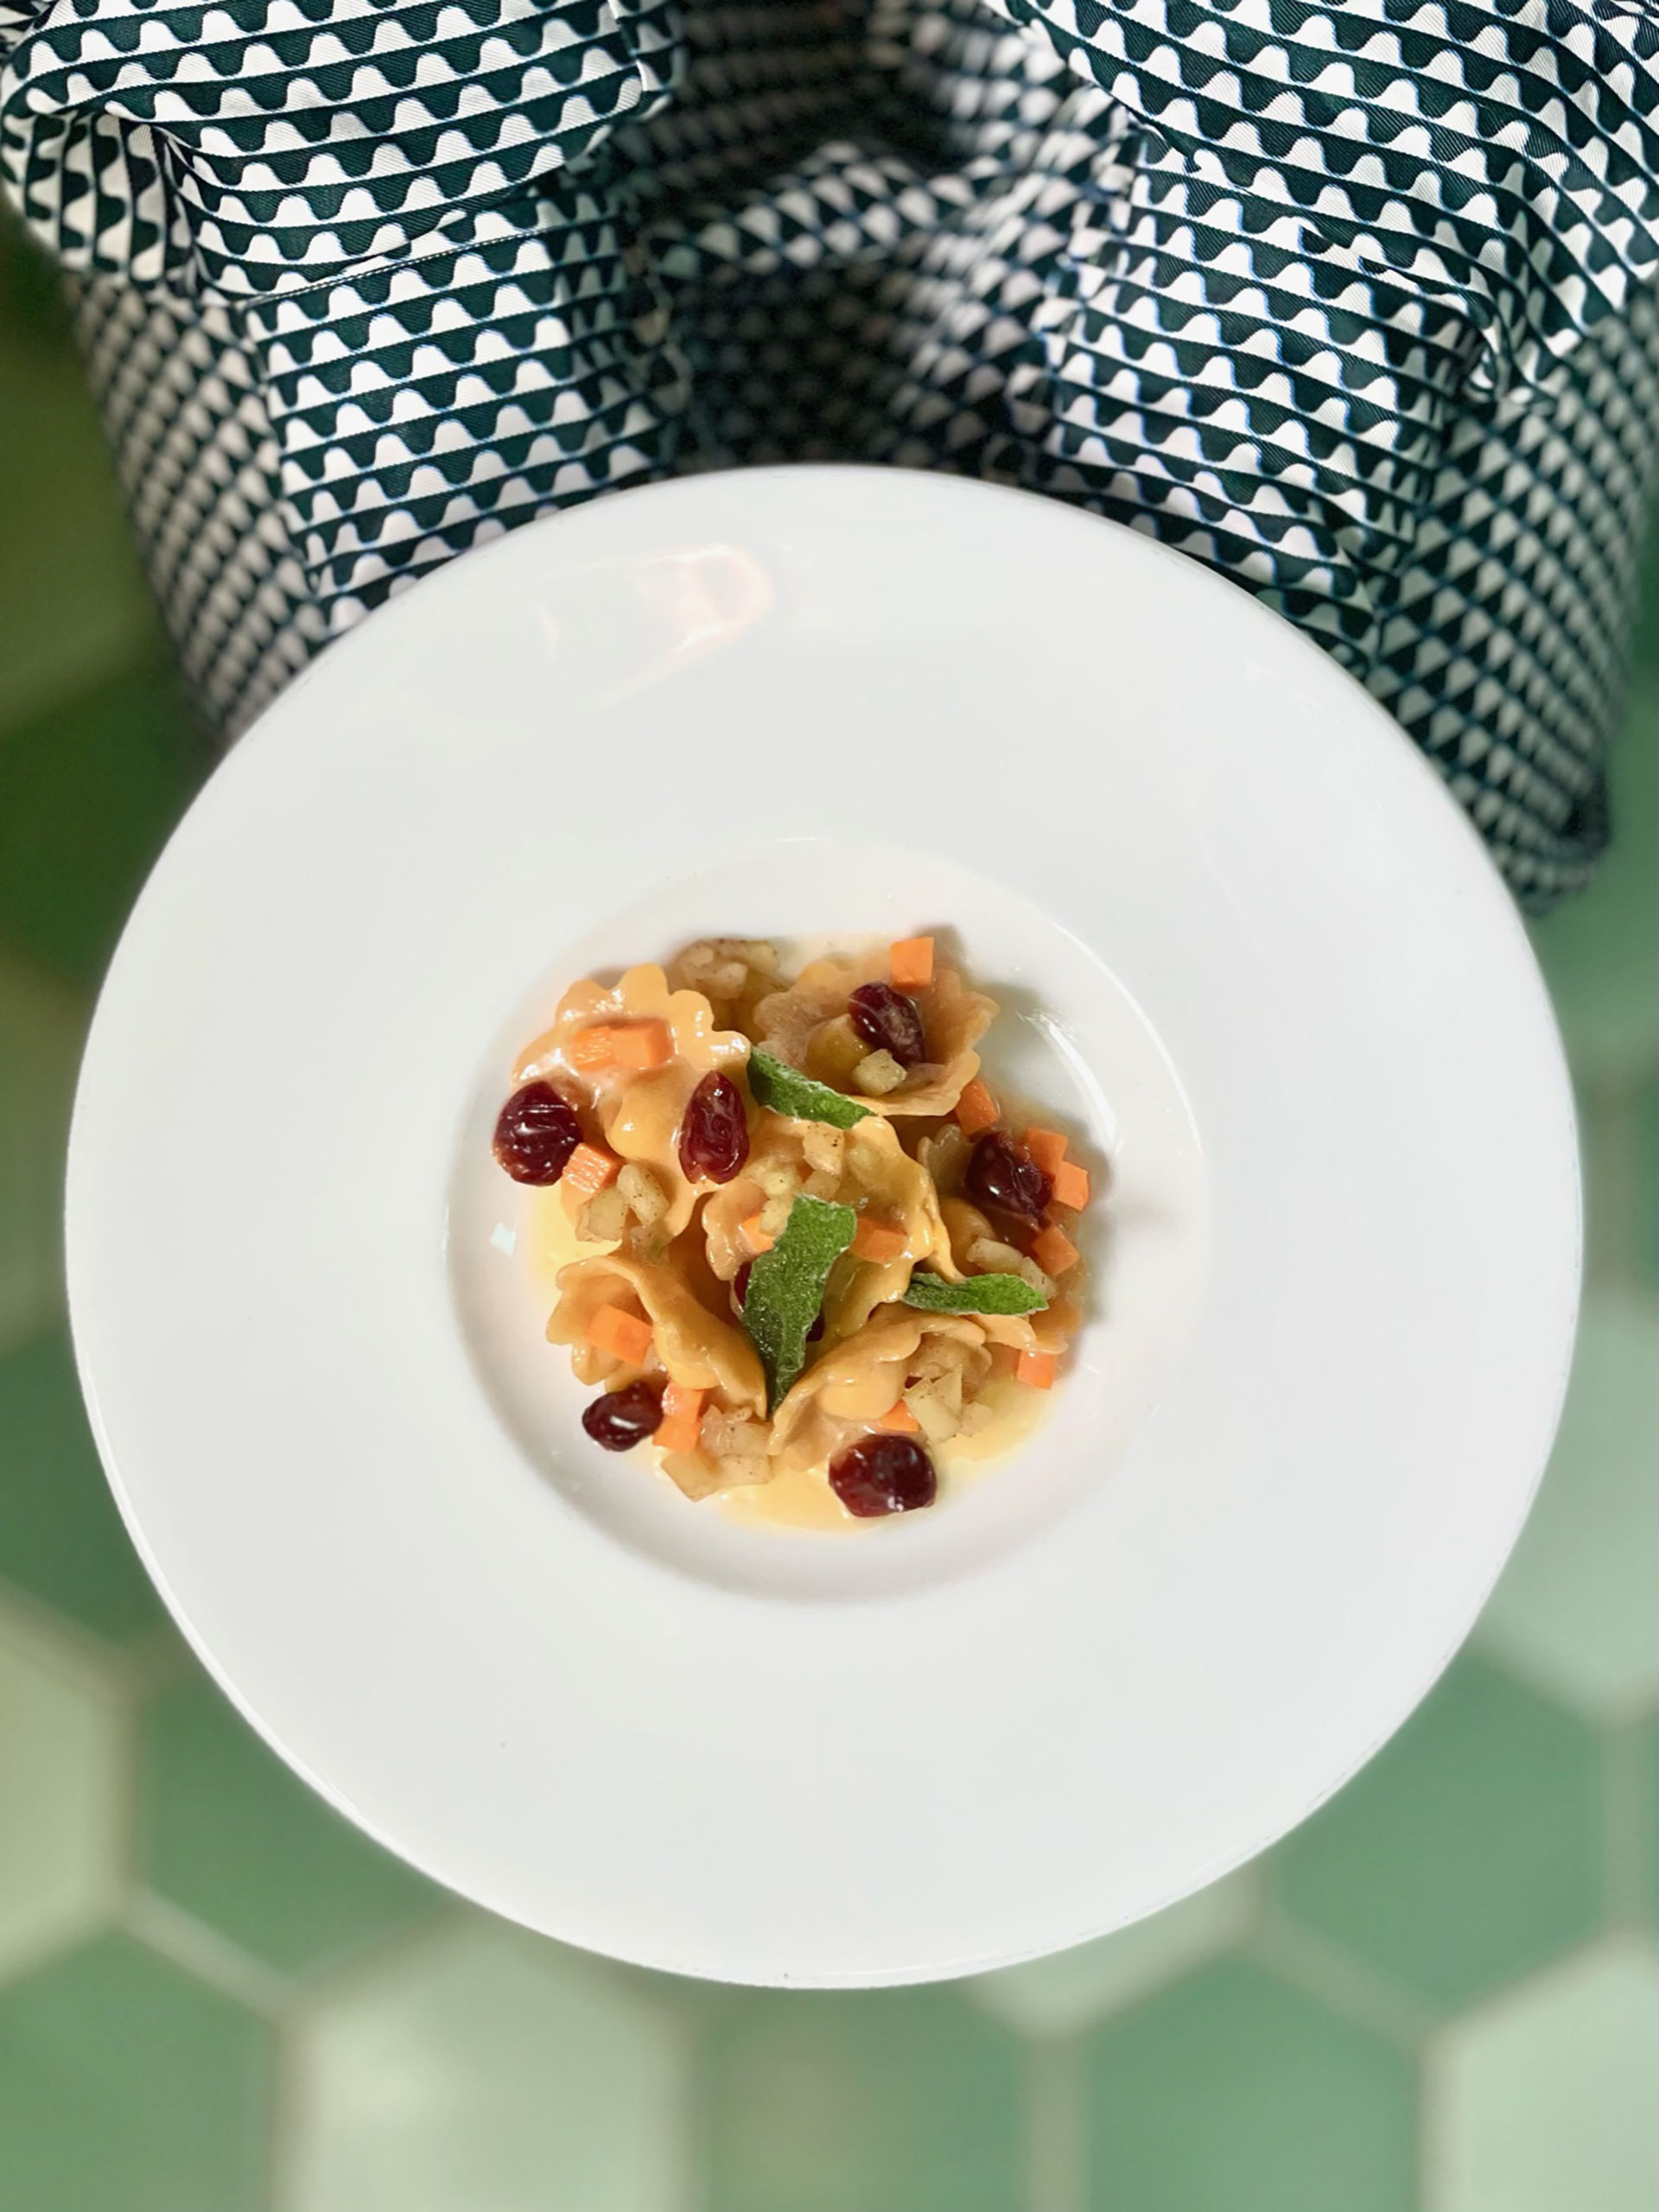 cappelletti pasta with cranberries being held by a woman in a funky dress on a green floor